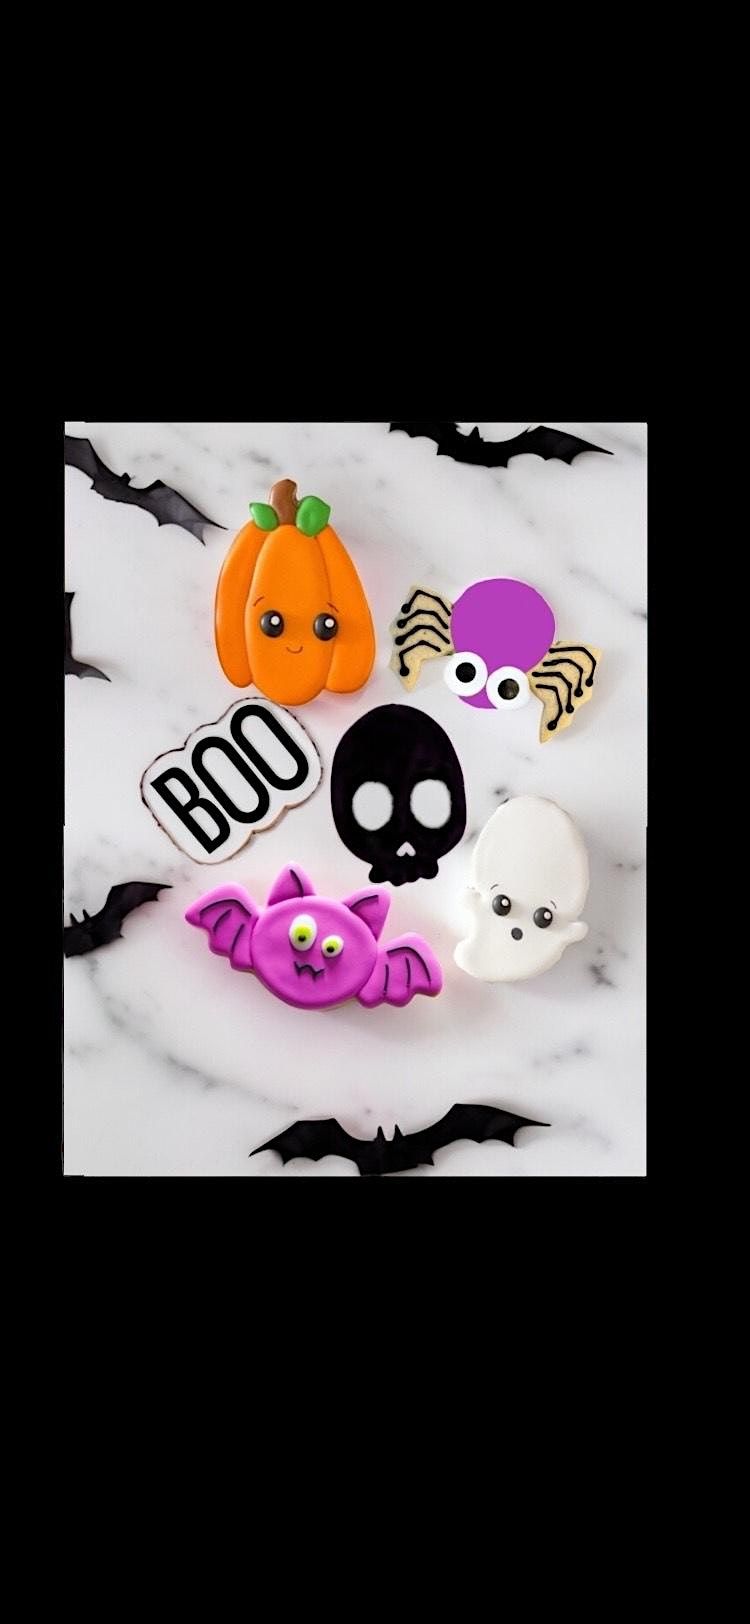 "BOO, You!" Sugar Cookie Decorating Class